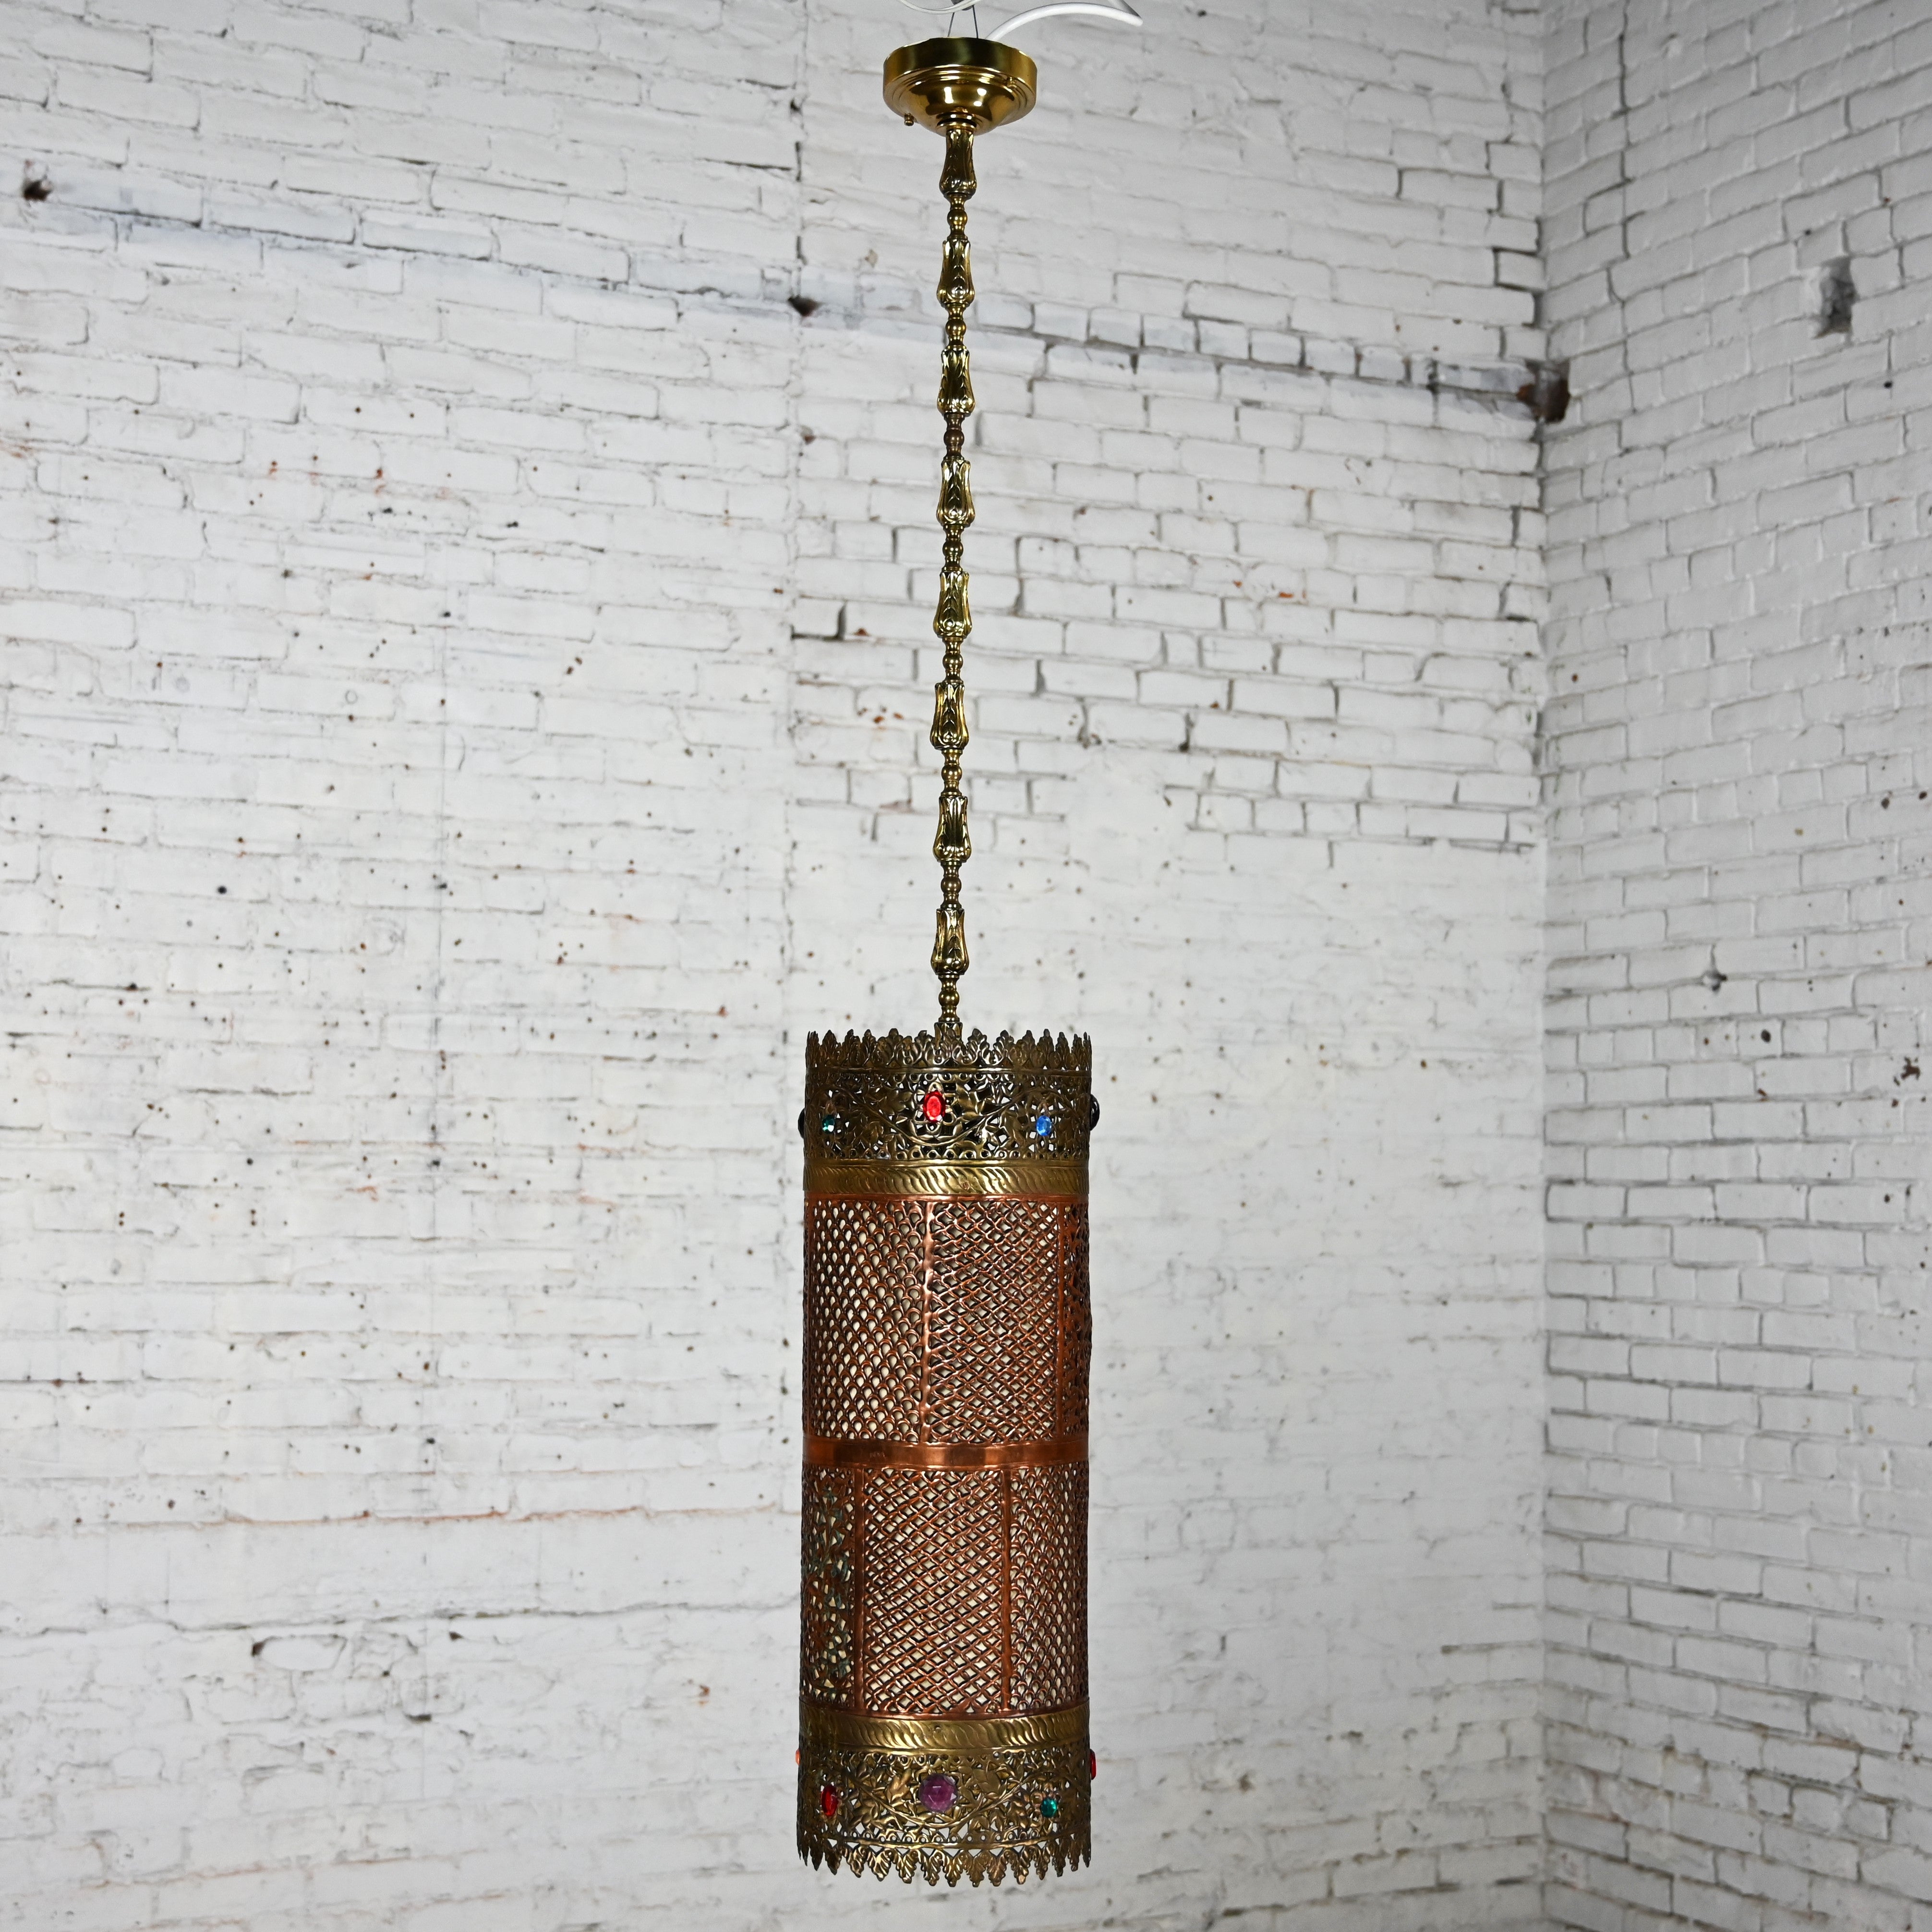 Magnificent vintage Moroccan or Moorish style embossed & pierced hand-crafted copper & brass pendant light fixture with multicolored glass & plastic jewels, decorative brass chain, and brass canopy, stamped Made in India. It is hardwired and has a